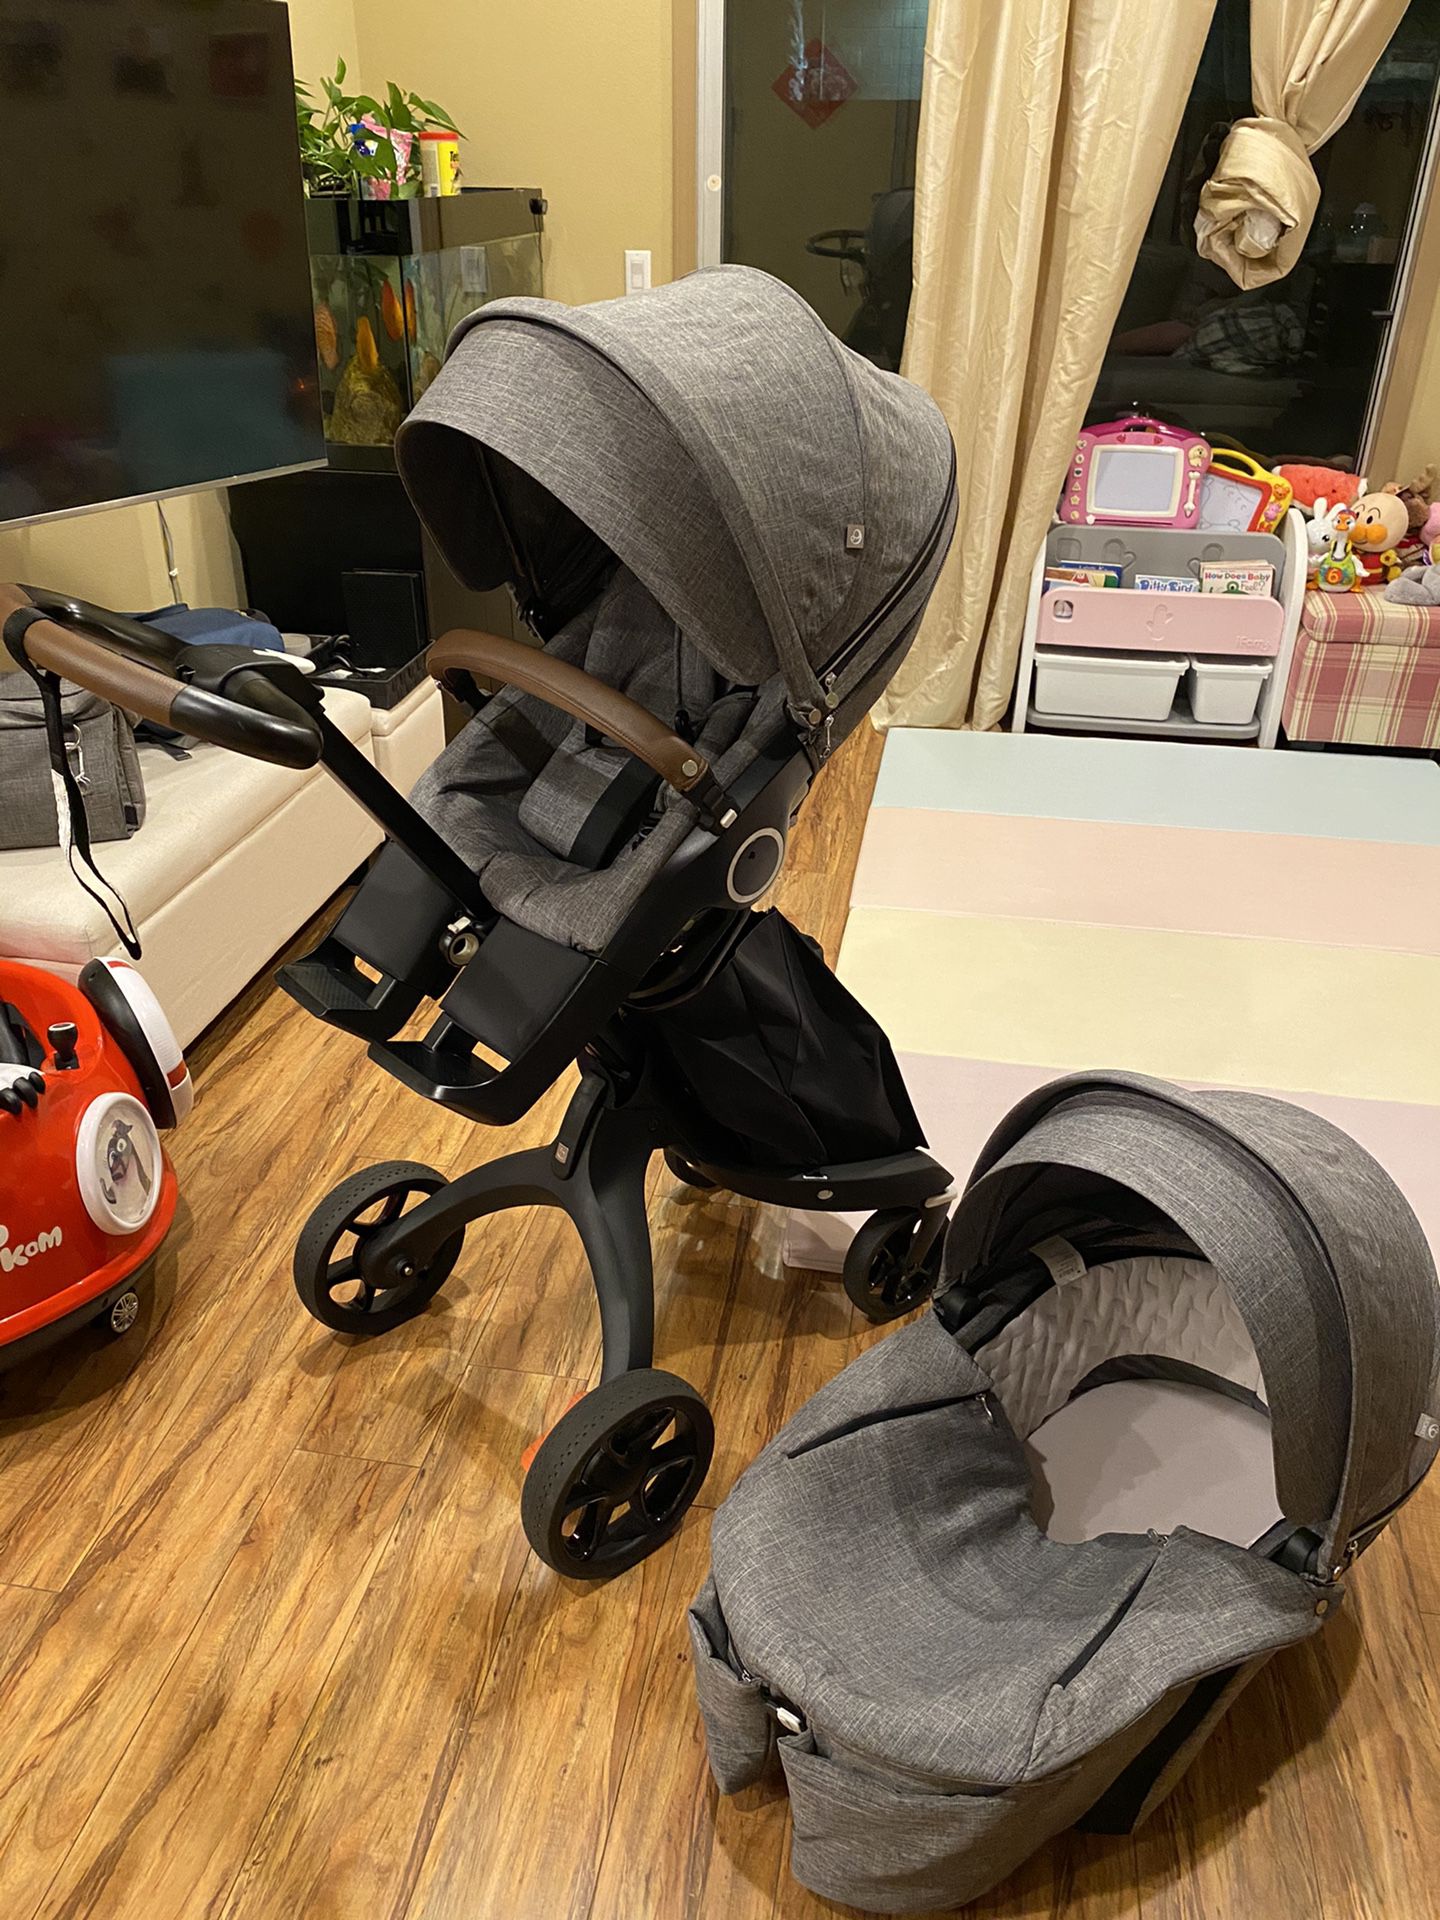 Stokke Xplory Stroller with carrycot bassinet and umbrella